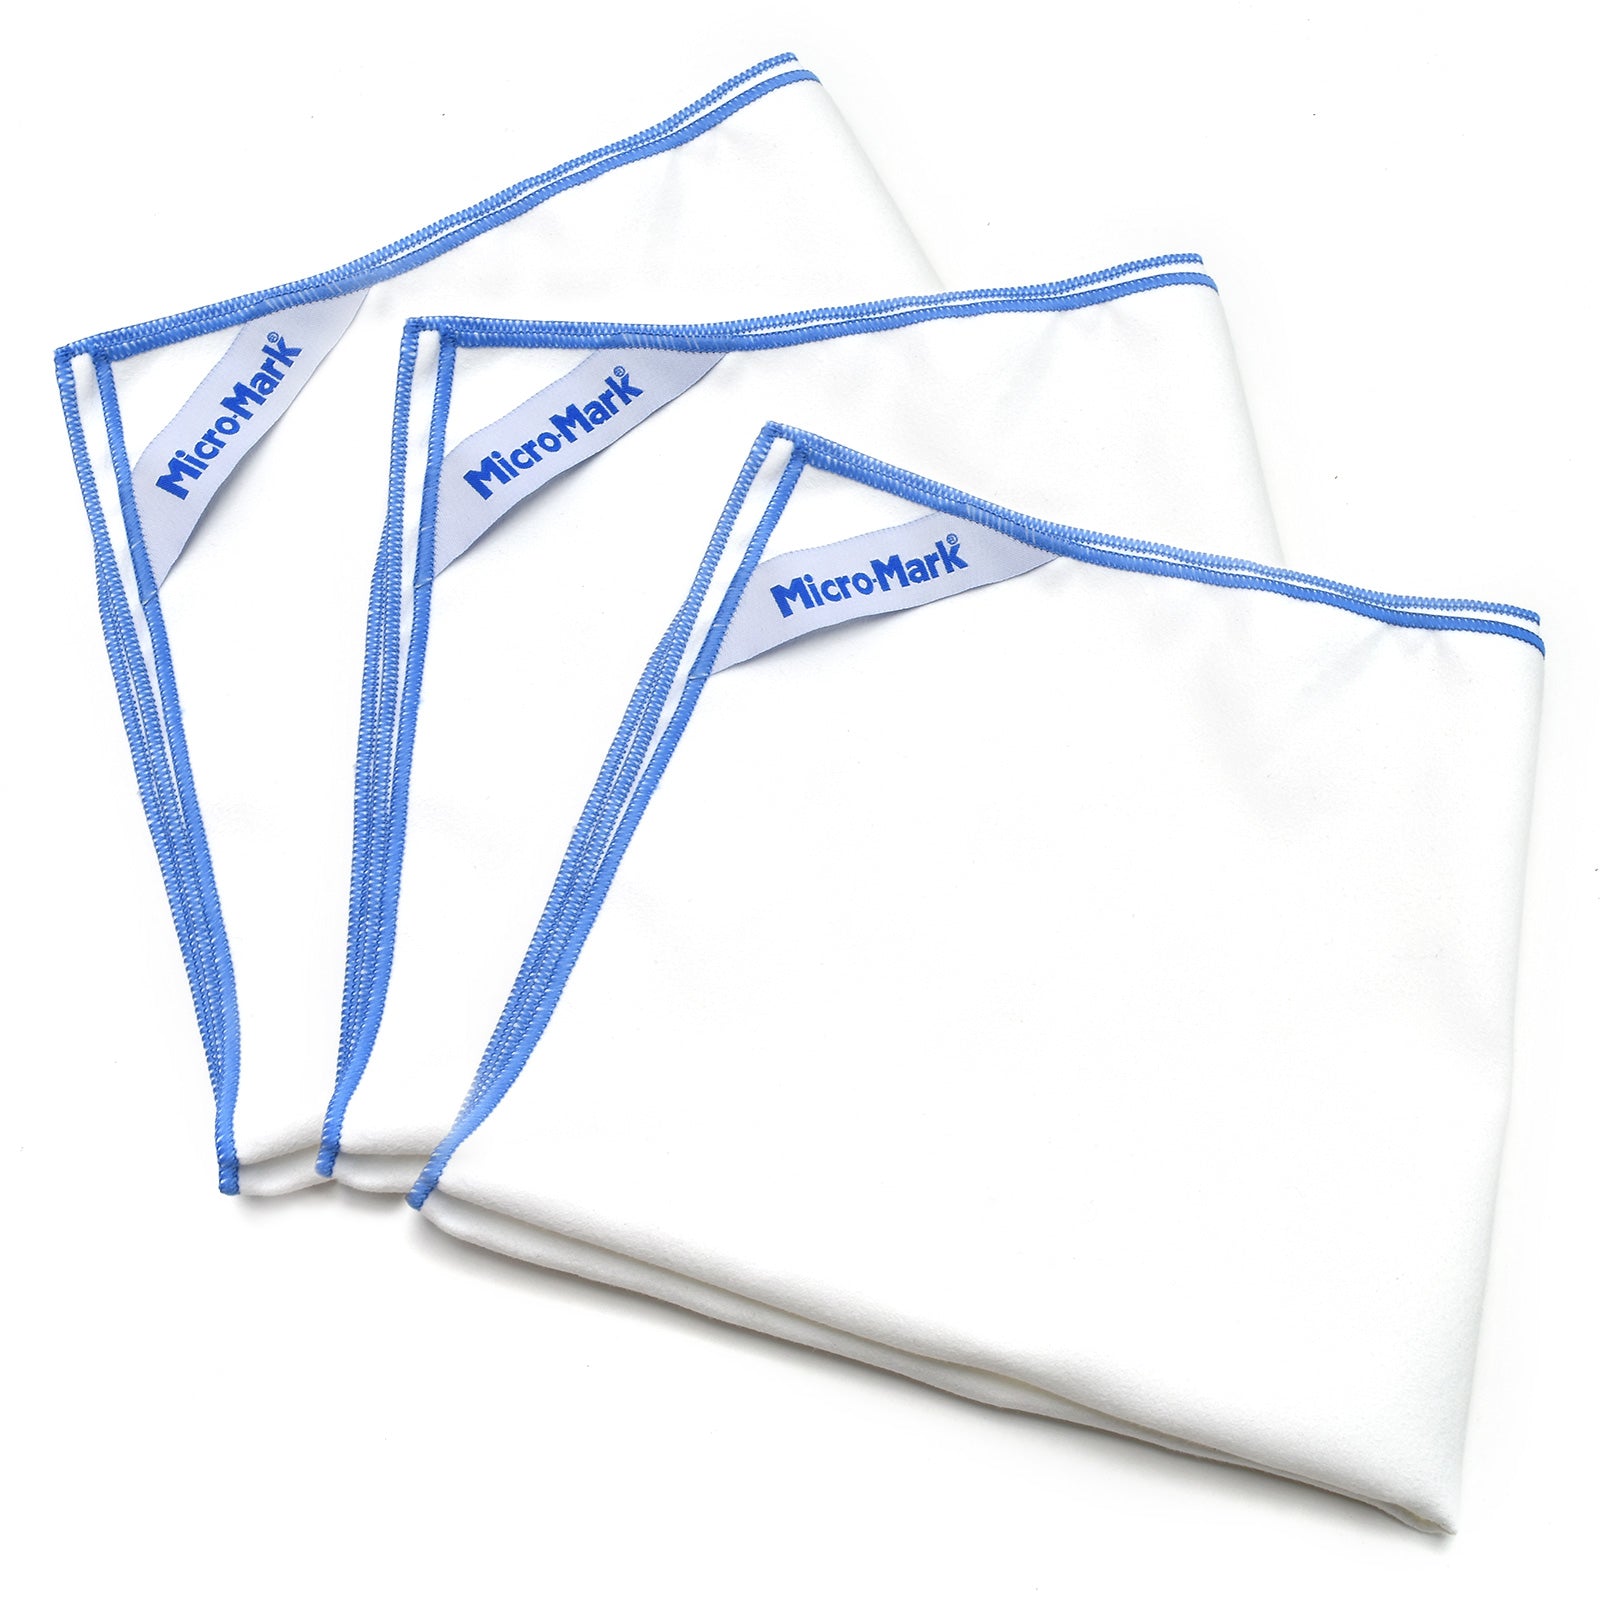 Micro-Mark Performance-Pro Microfiber Cleaning & Polishing Cloths, Pack of 3